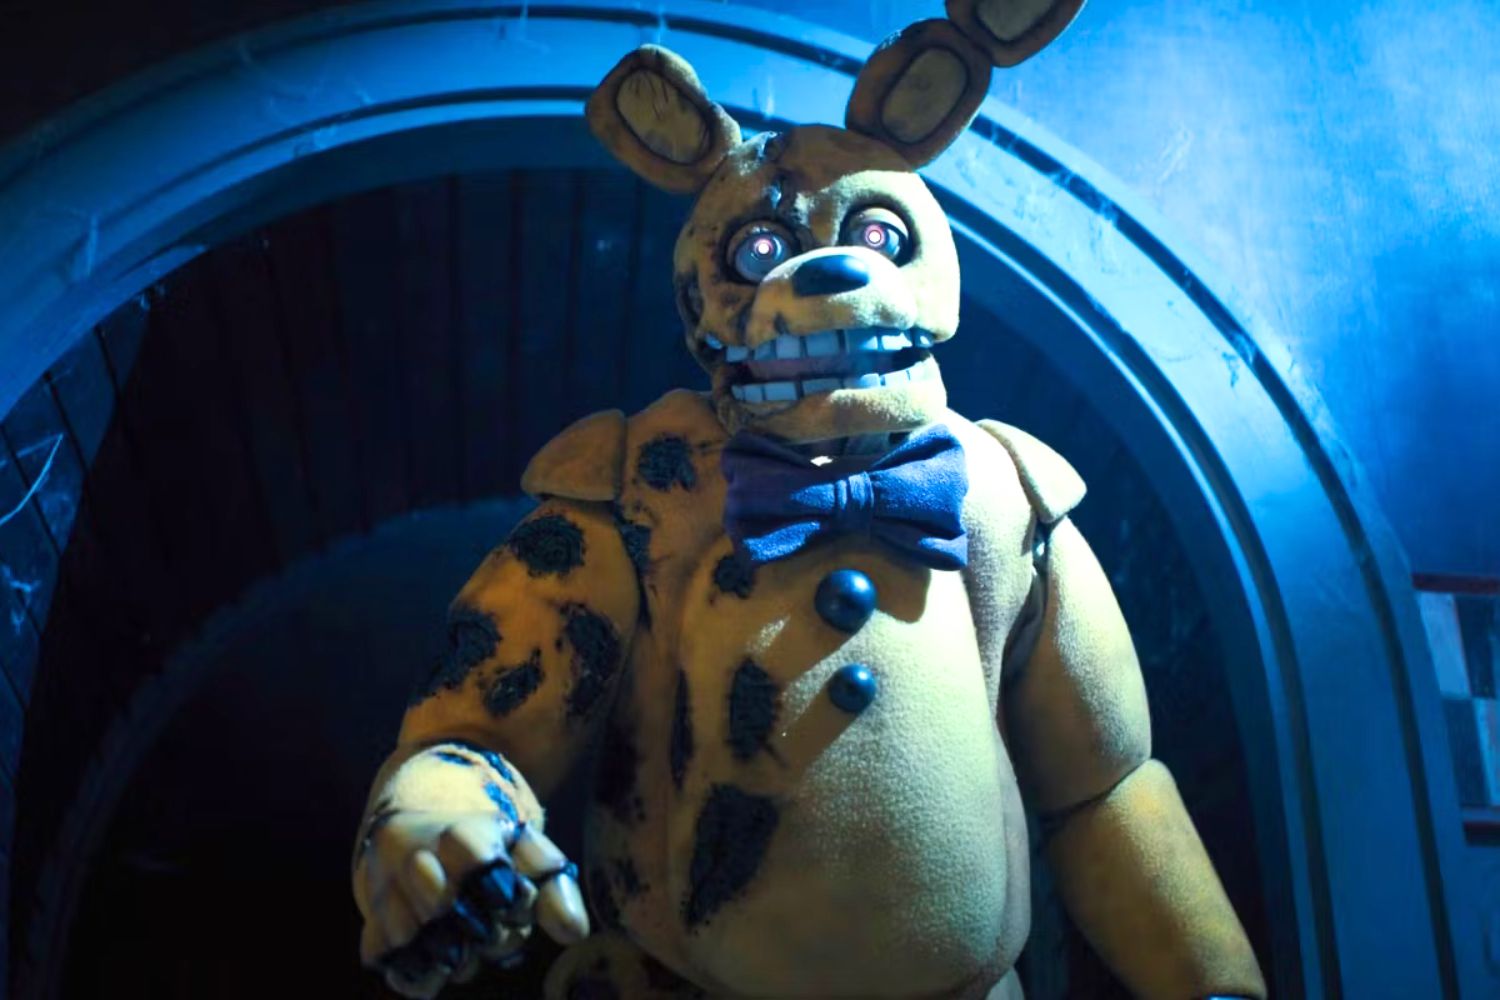 Five Nights At Freddys Springtrap